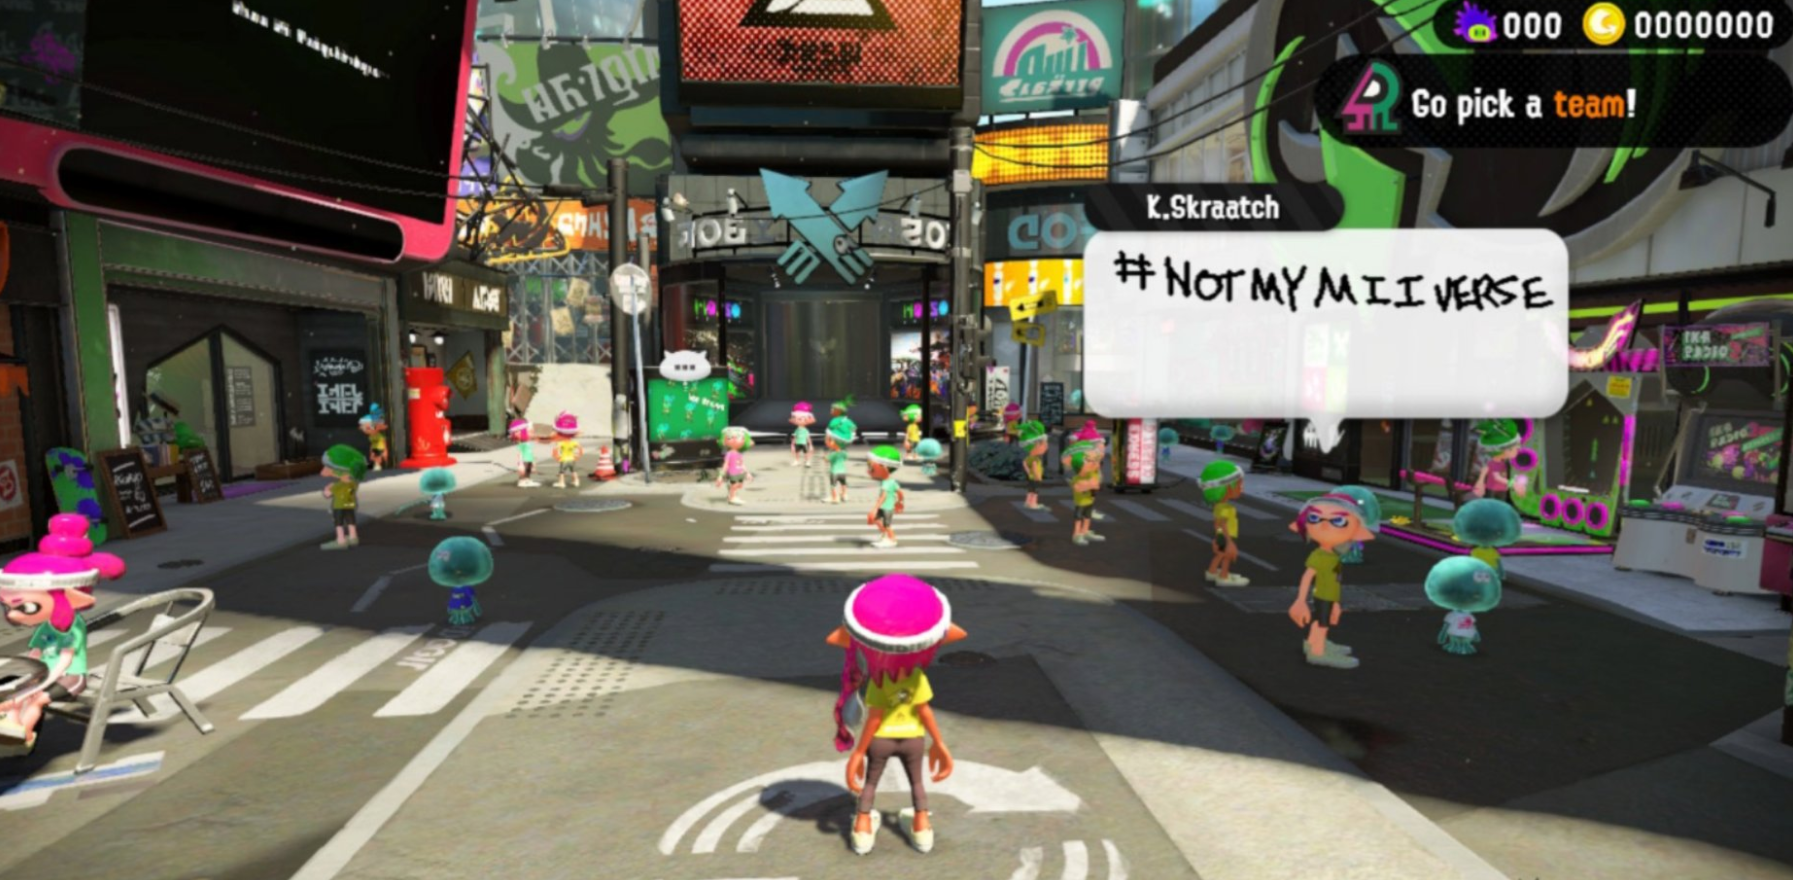 Even Without Miiverse, Splatoon 2’s Lobby Is Still Amazing